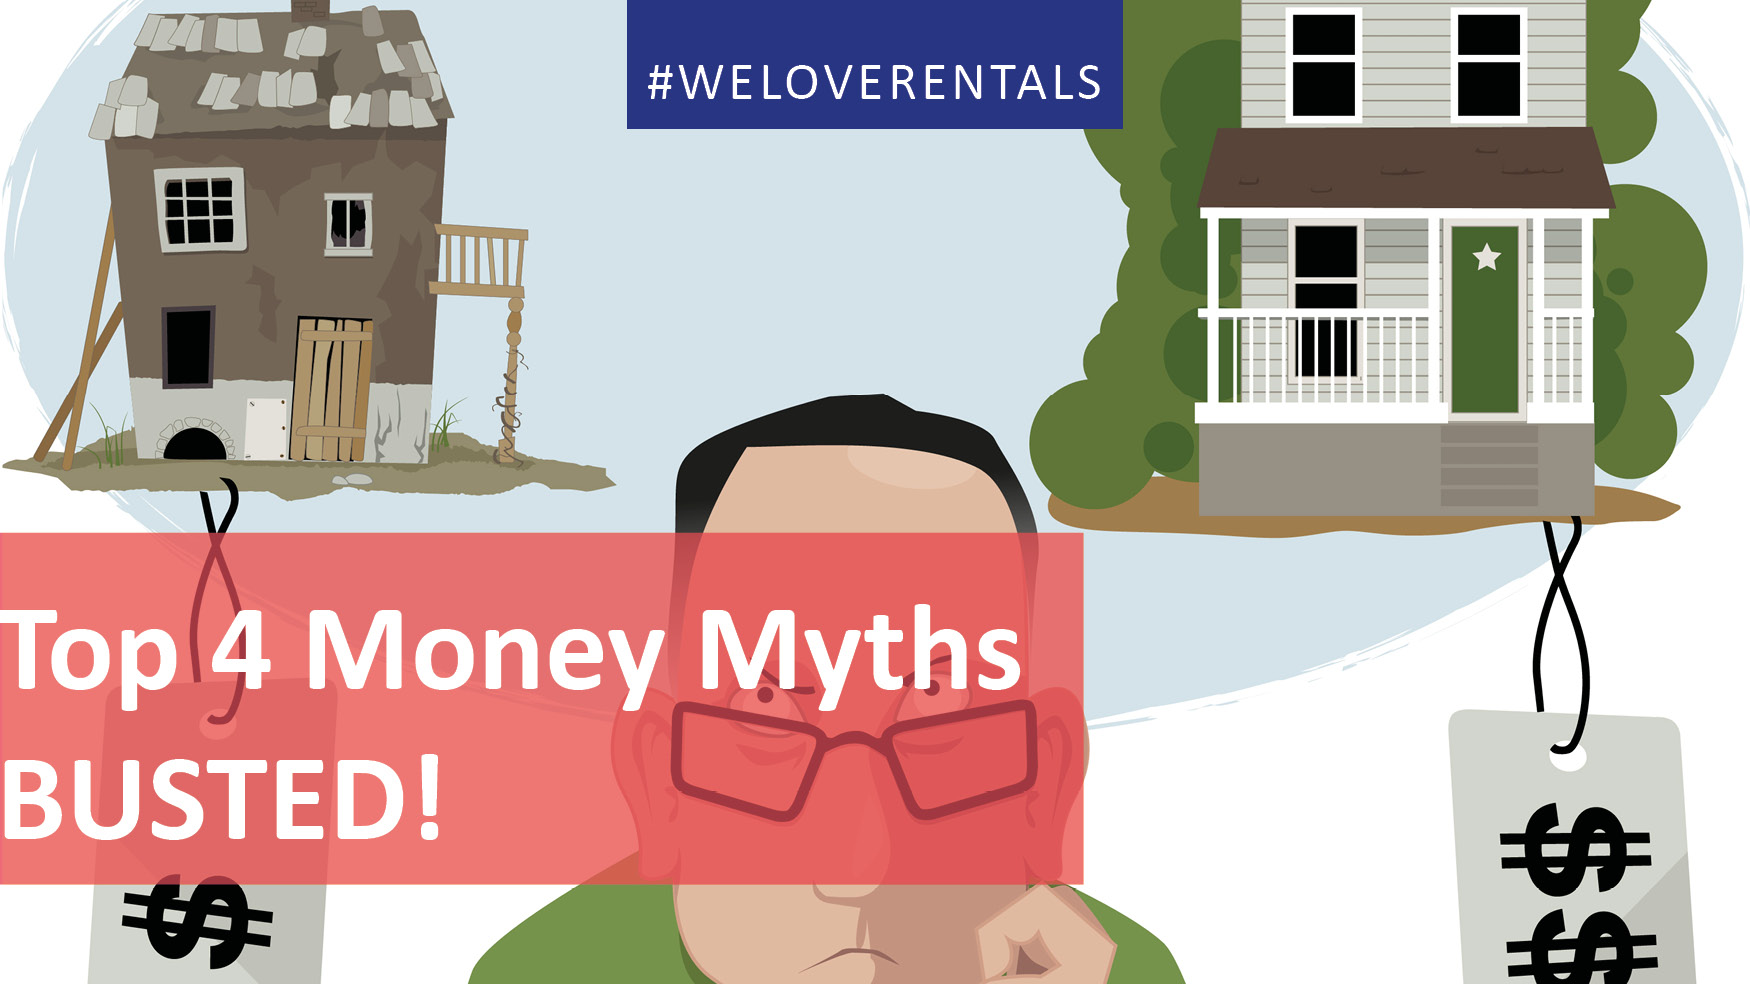 We Love Rentals Top 4 Money Myths Busted